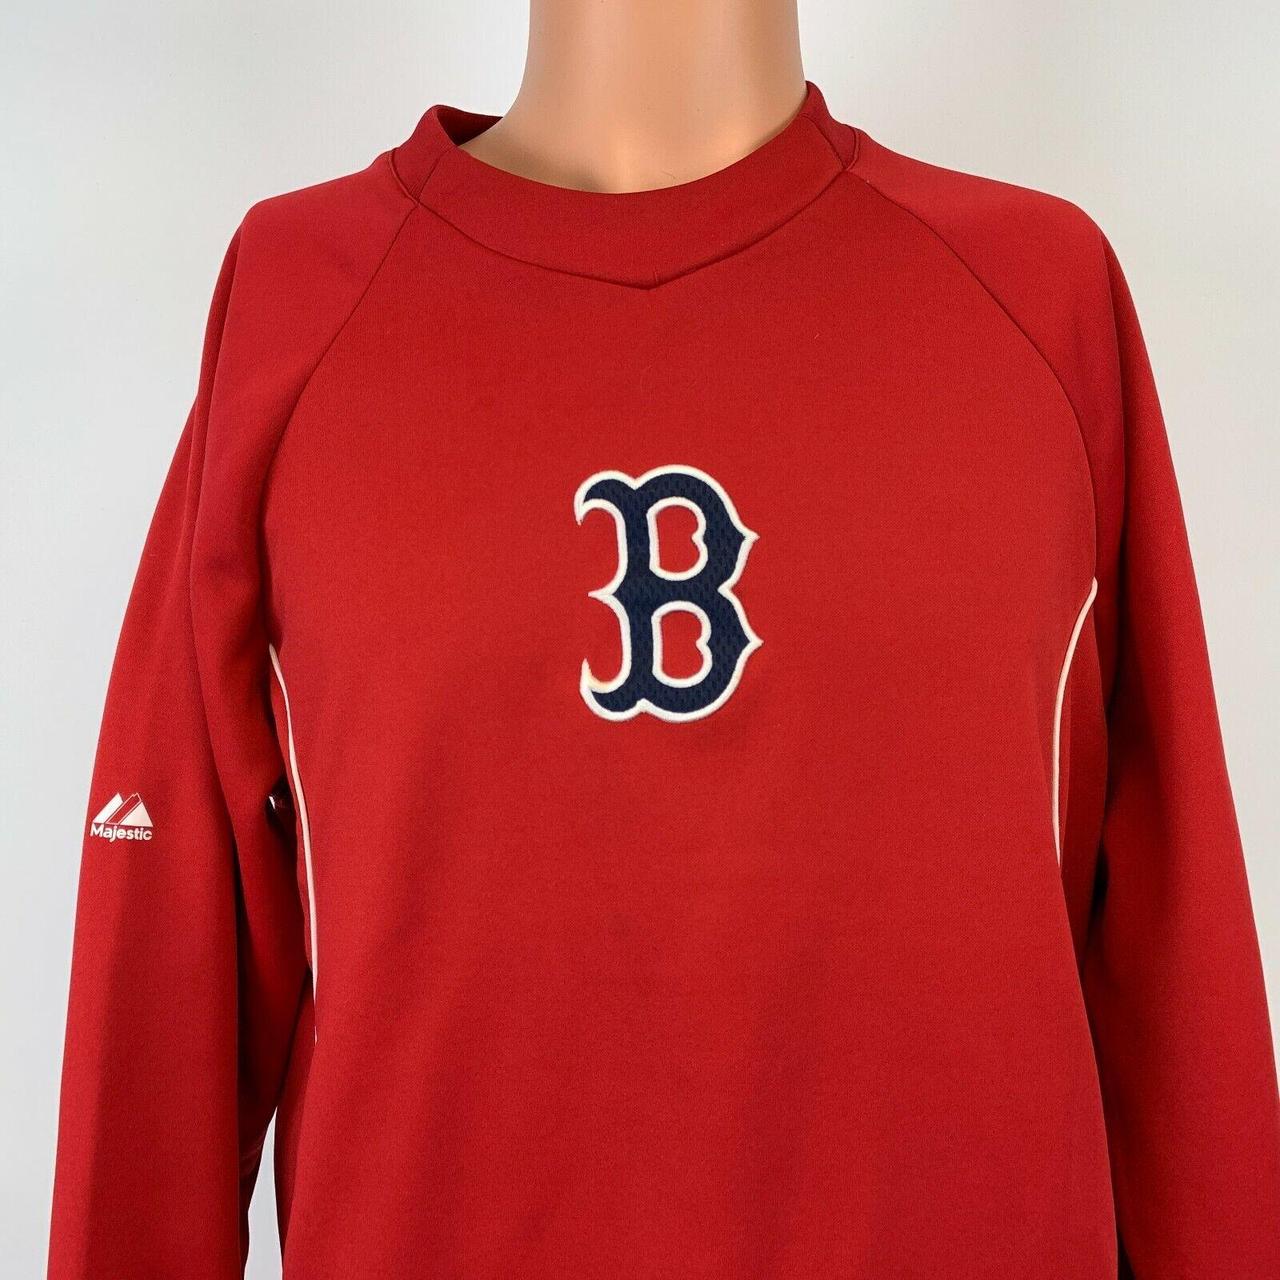 Majestic MLB Authentic Collection Boston Red Sox T-Shirt - Medium